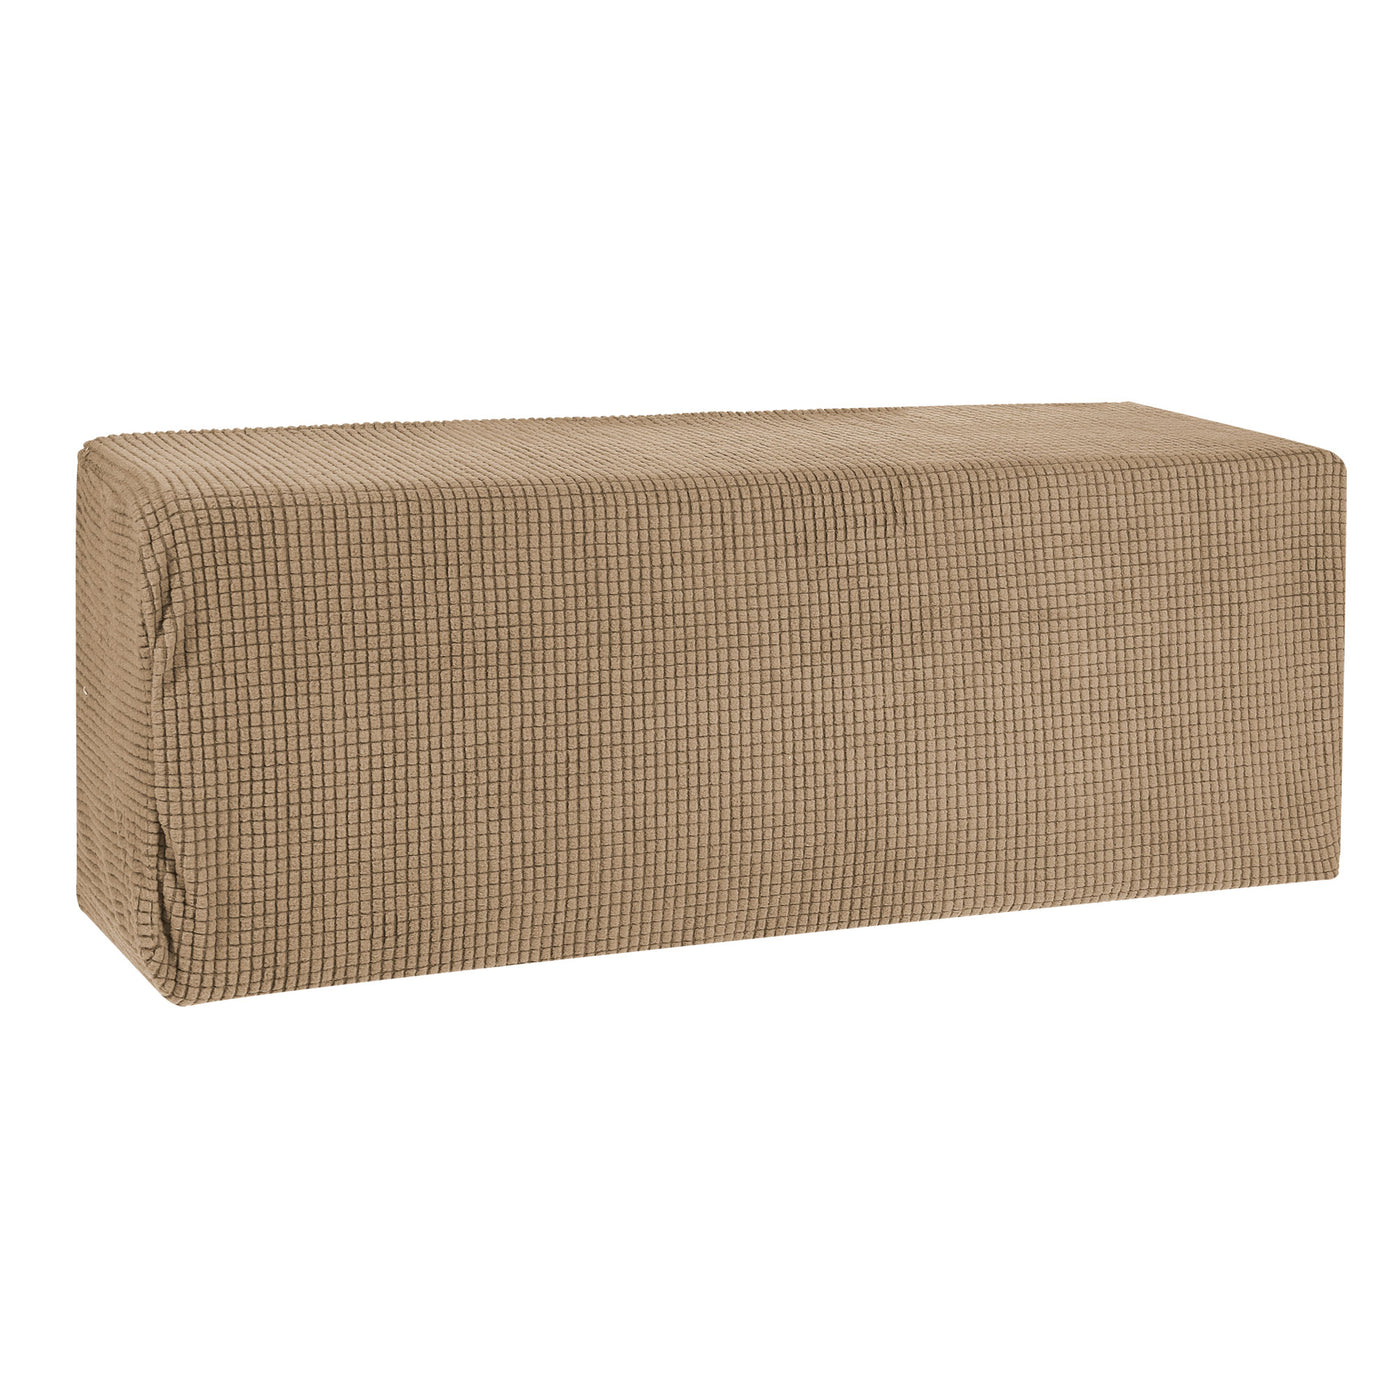 Harfington Air Conditioner Cover 35-37 Inch Knitted Elastic Cloth Dustproof for Wall-Mounted Units Split Indoor AC Covers Light Brown